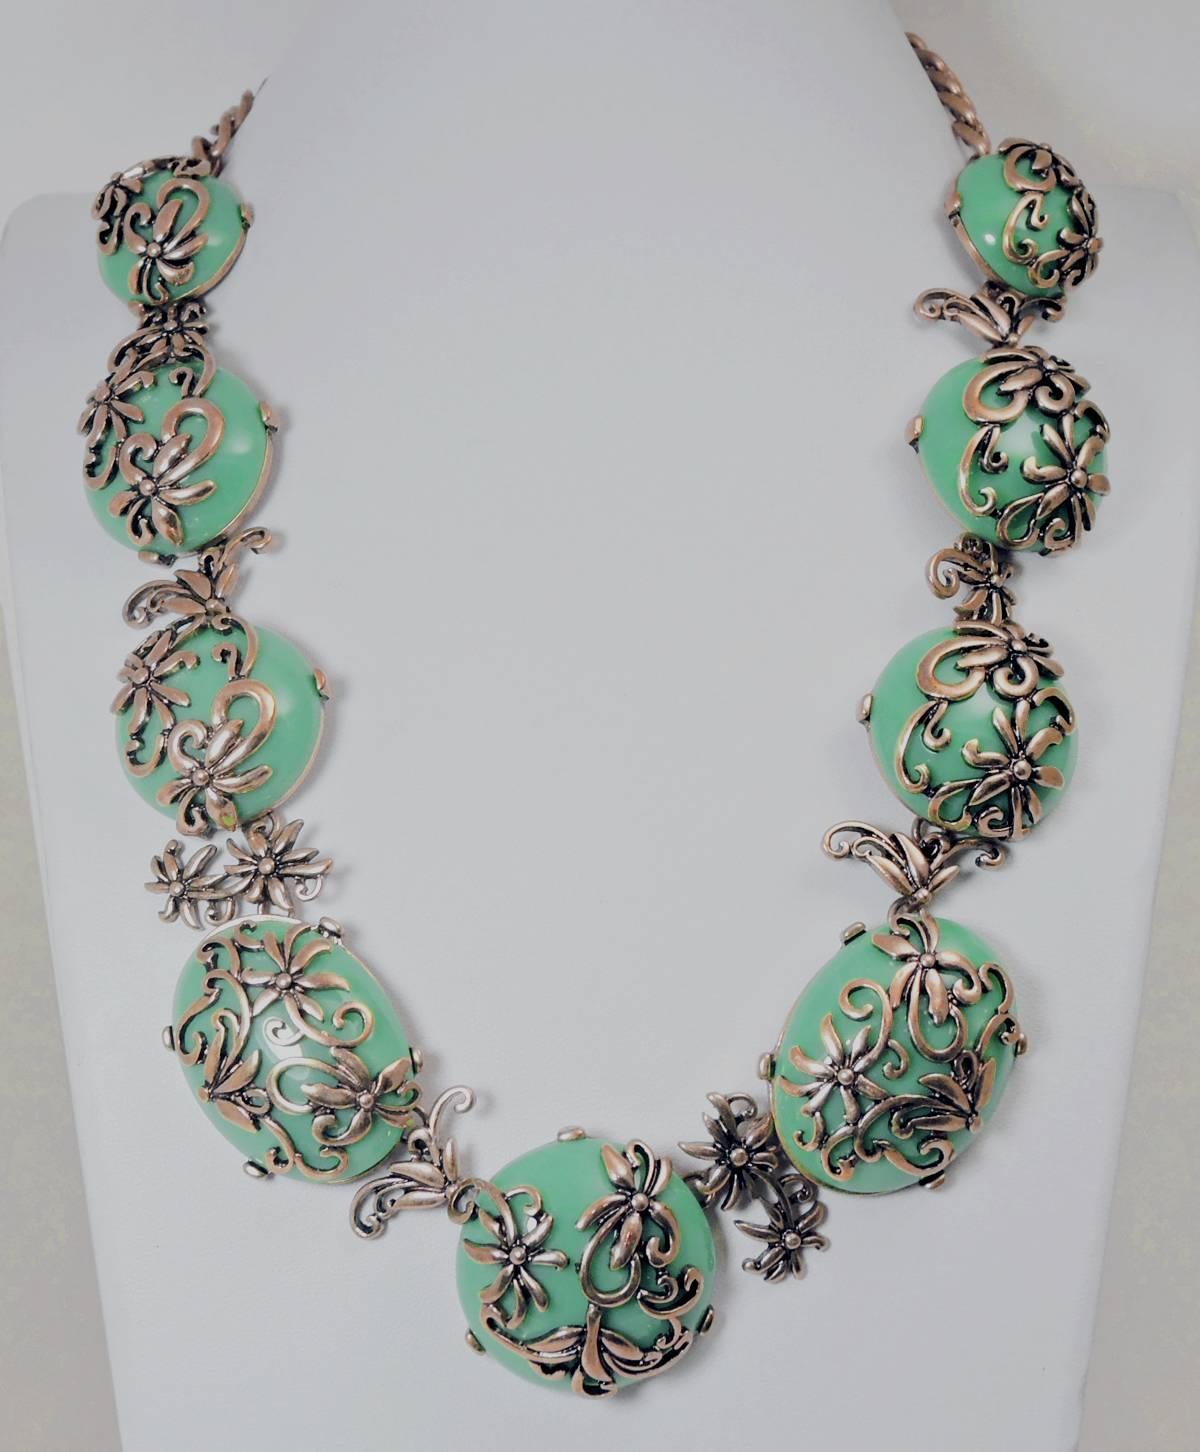 This is a statement necklace made by Oscar De La Renta featuring dome shaped faux green turquoise stones with a gold tone floral open work design over each stone. This necklace has a lobster clasp and measures 22” x 1-12”.  It is signed “Oscar De La